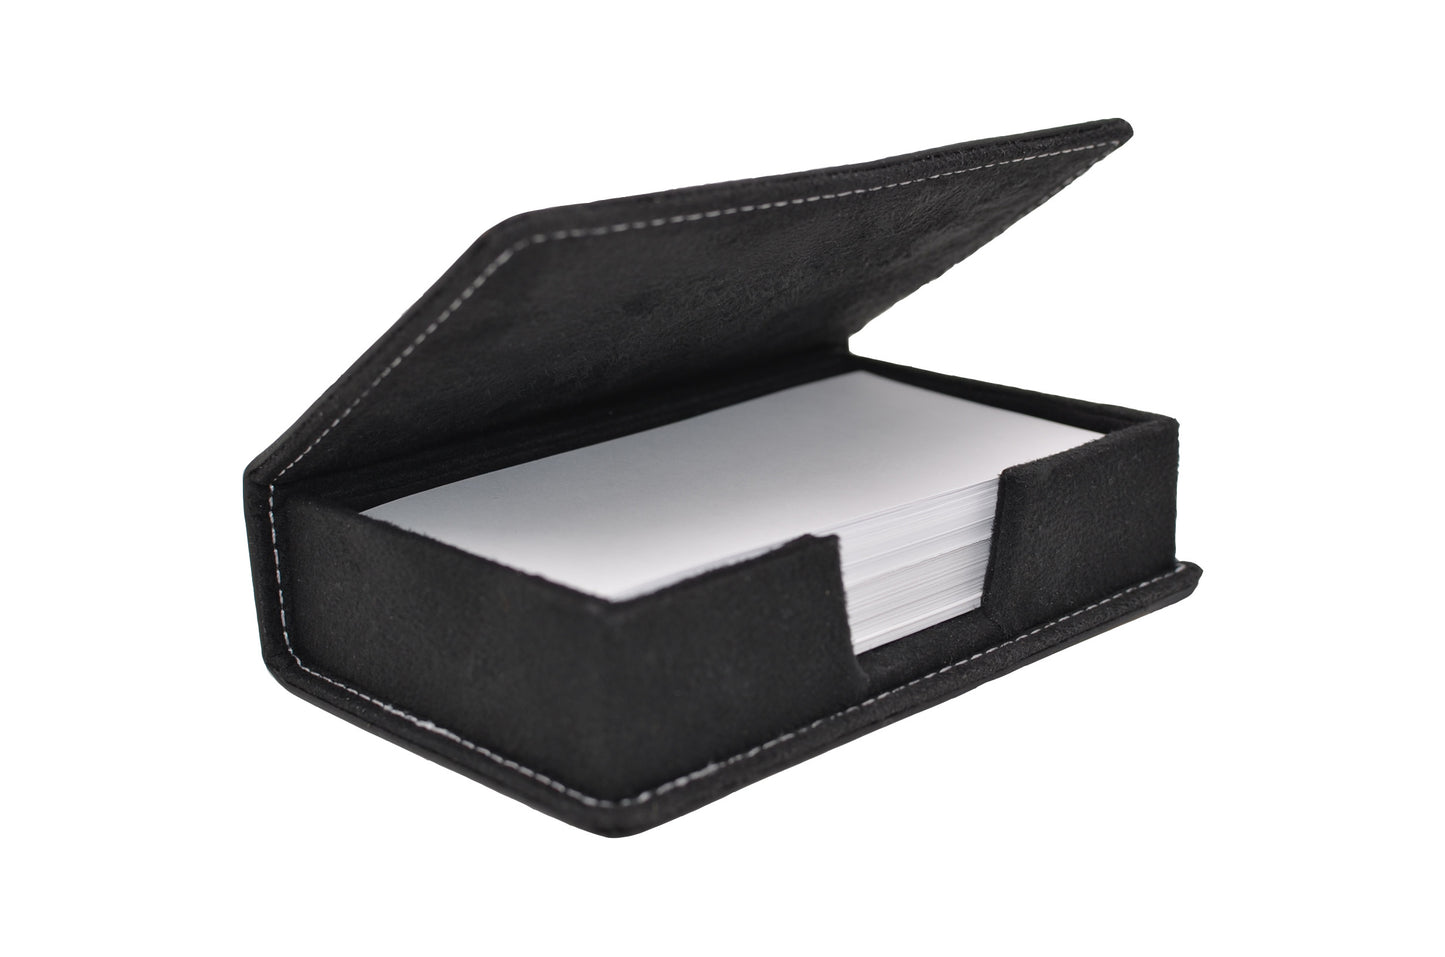 Leather: Desk Note / Index Card Holder – Refill Services